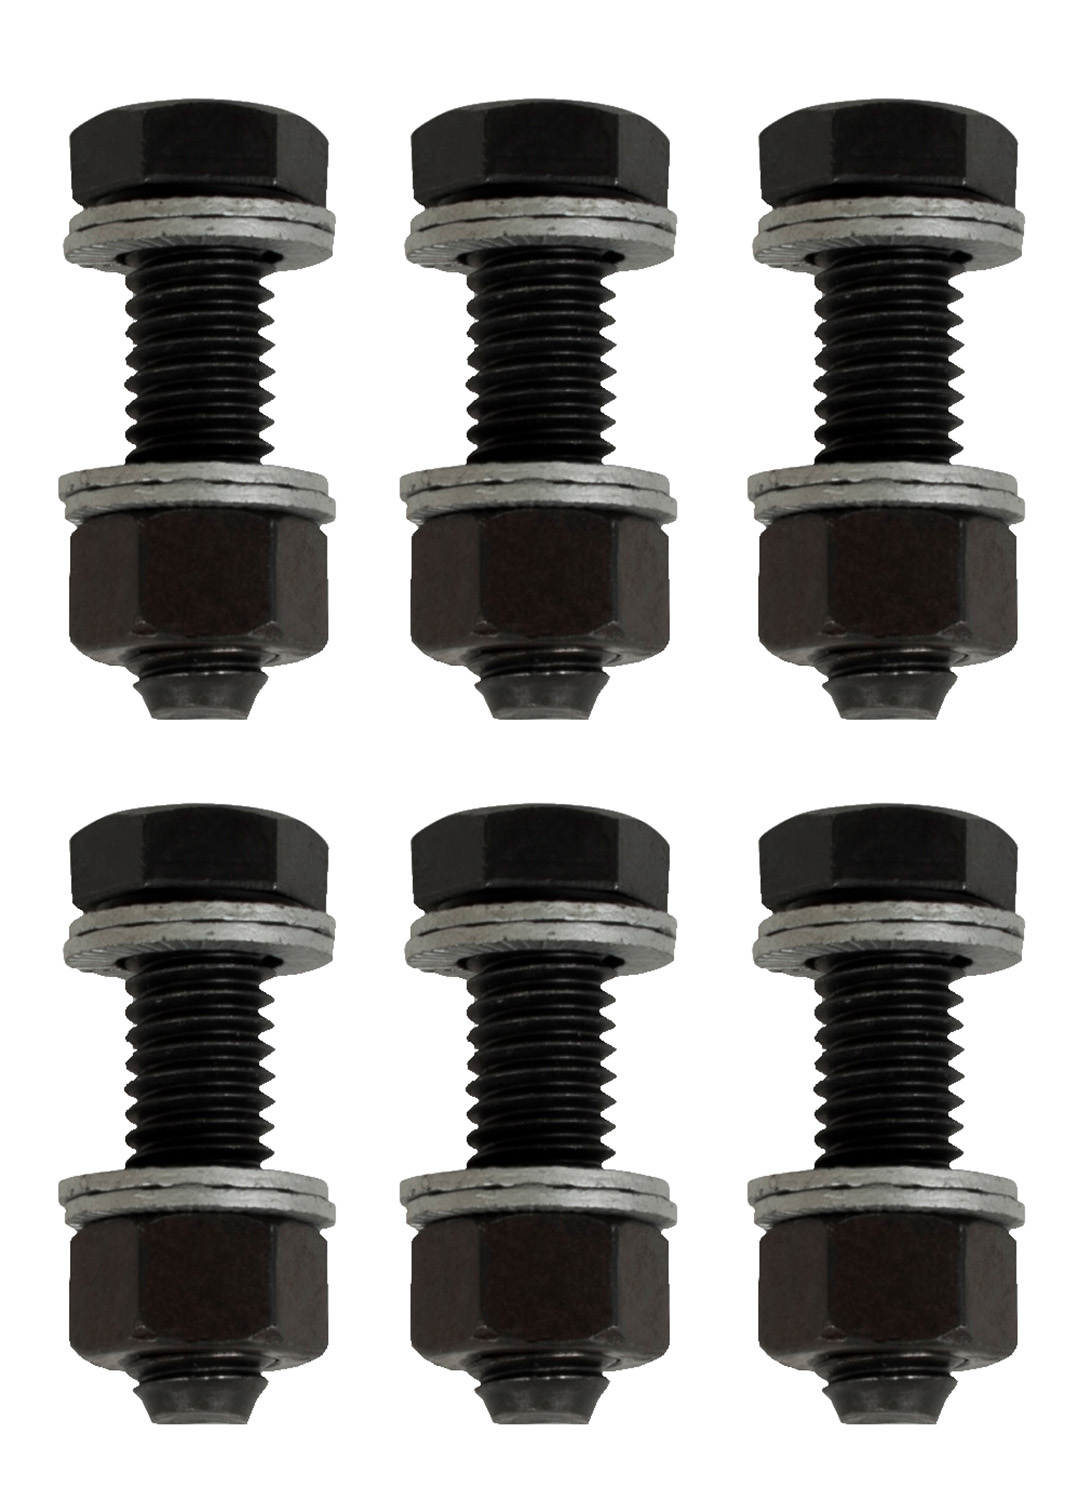 Proform 66757 Collector Bolt, Locking, 3/8-16 in Thread, 1.000 in Long, Hex Head, Steel, Black Oxide, Set of 6